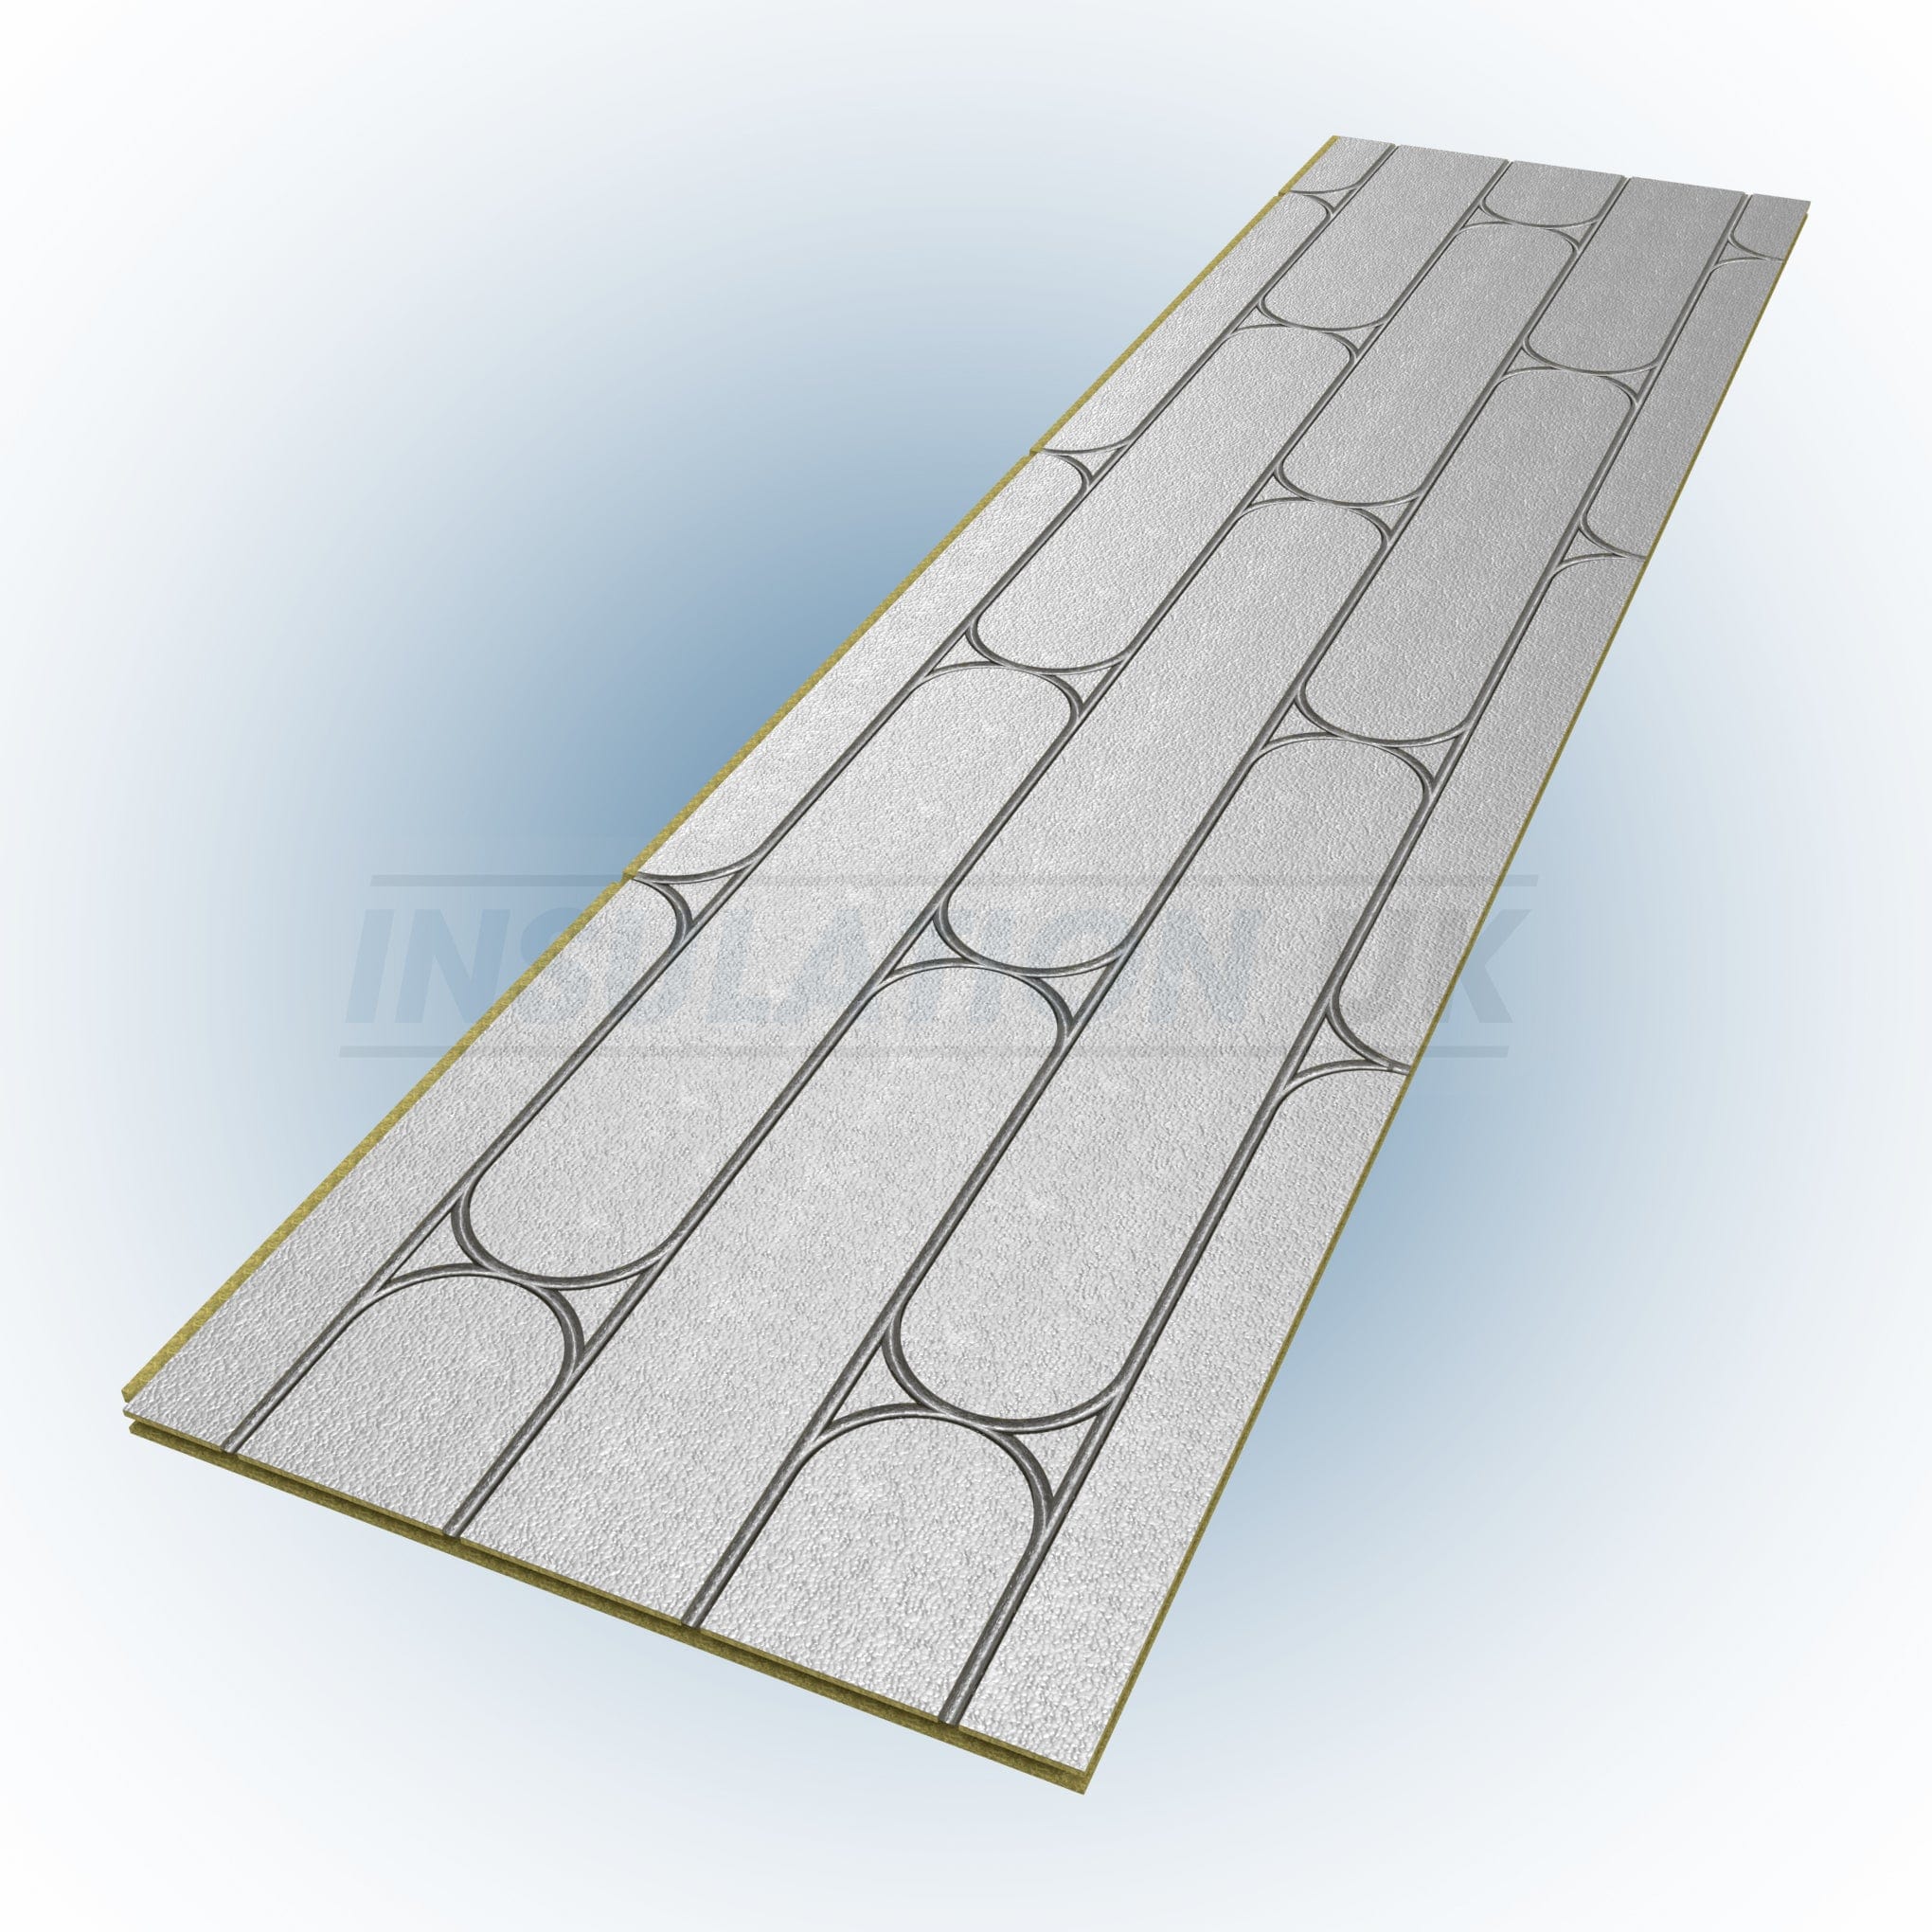 Tekwarm Insulation Tekwarm Routed Foil Faced Chipboard UFH Panel | 2400mm x 600mm x 22mm IUK01522